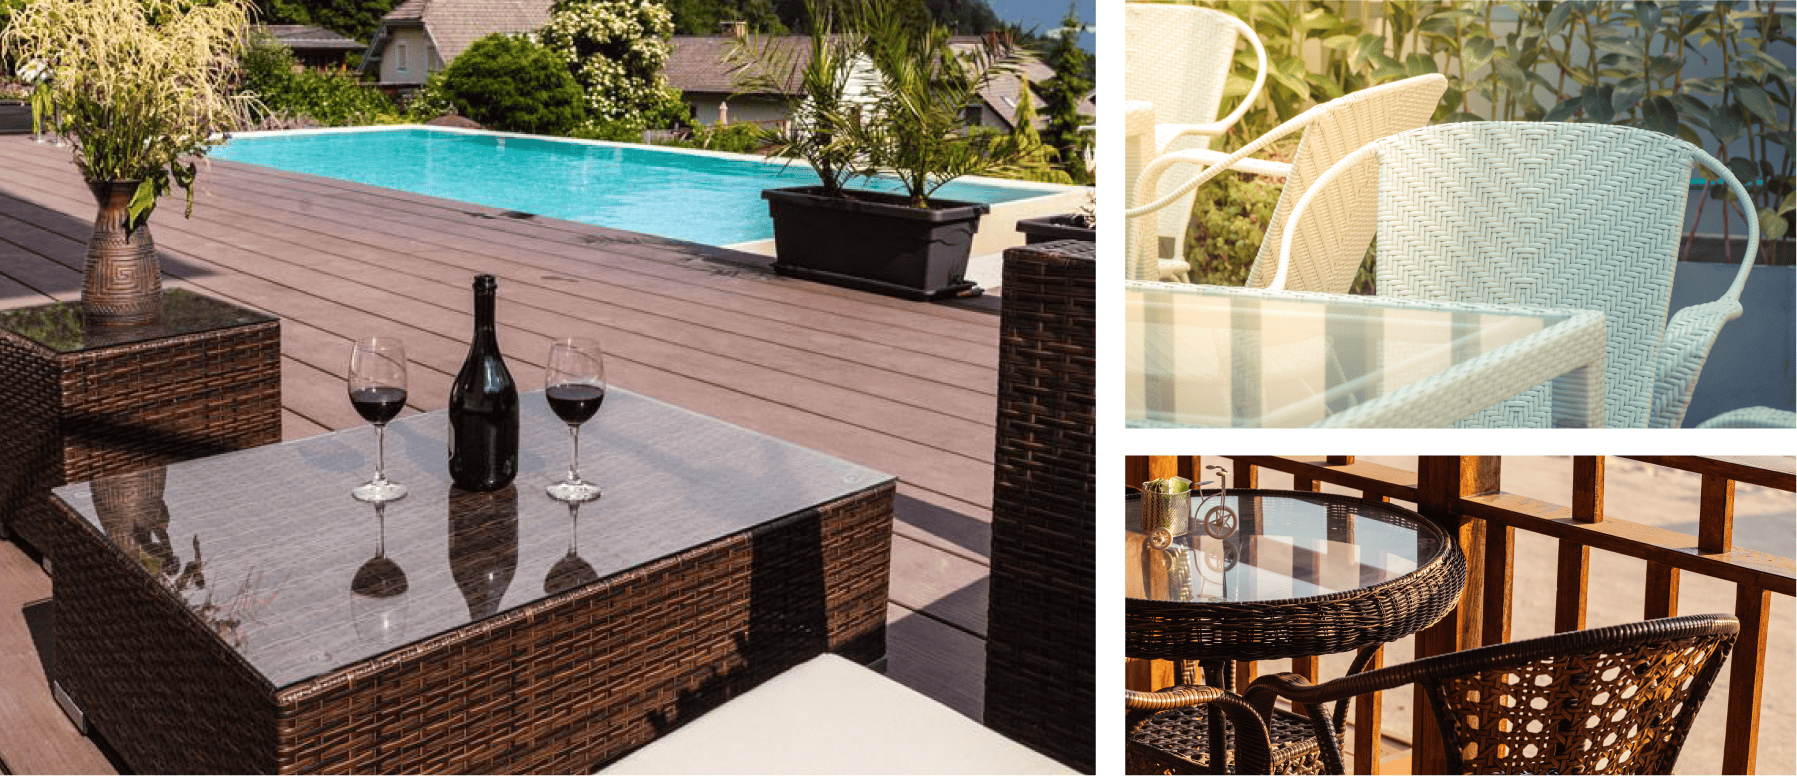 A collage of images featuring a pool, outdoor furniture, and a wine glass on a patio, with a glass cover on the patio table.